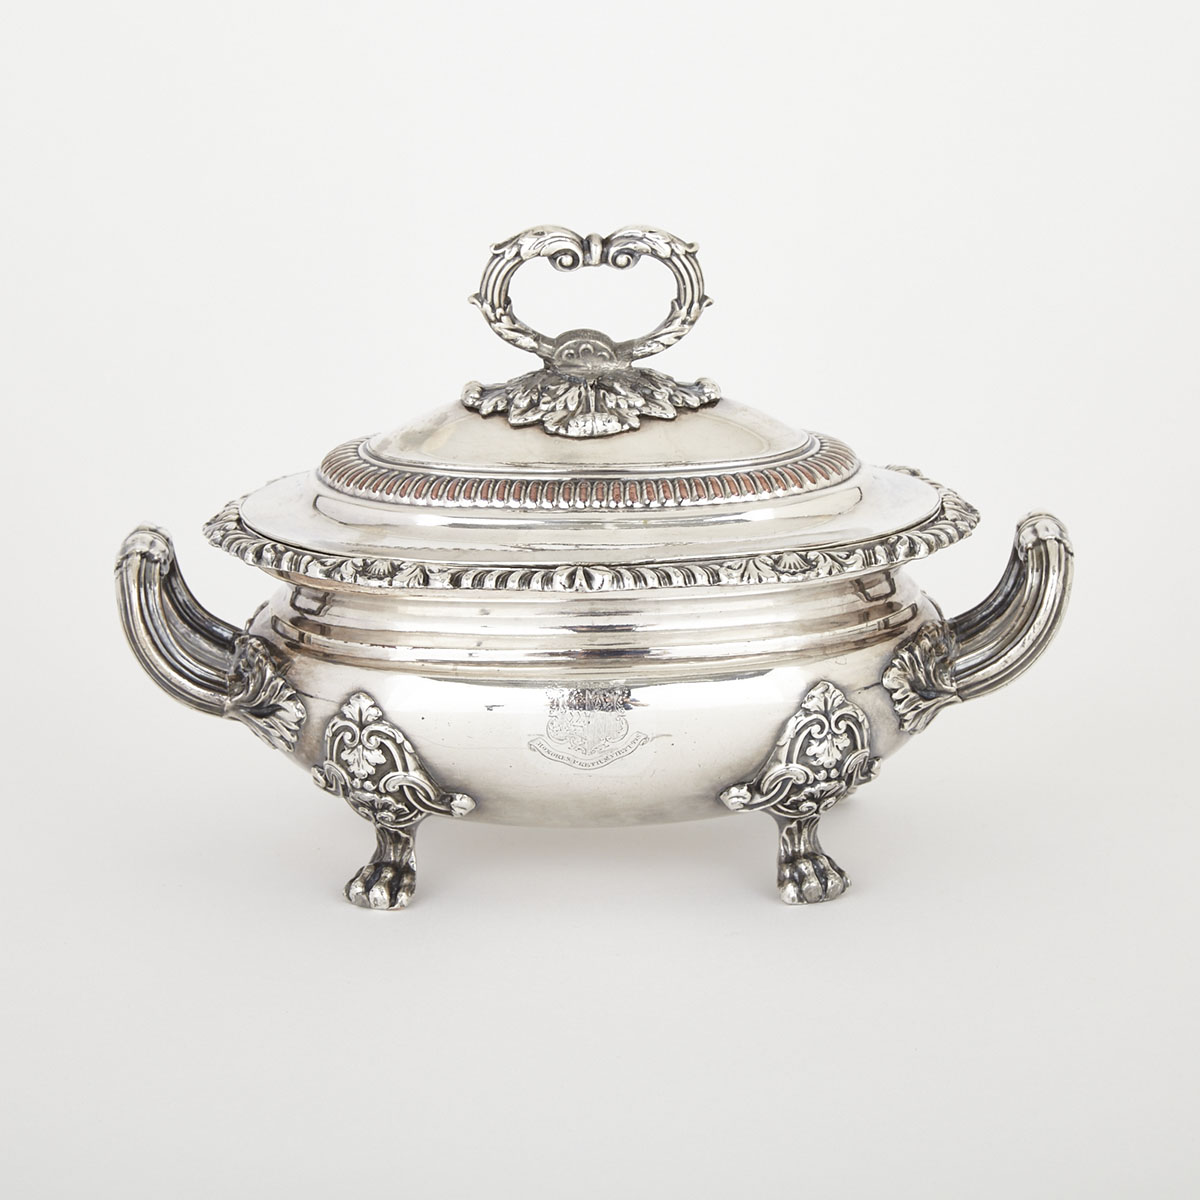 Old Sheffield Plate Oval Covered Sauce Tureen, c.1825